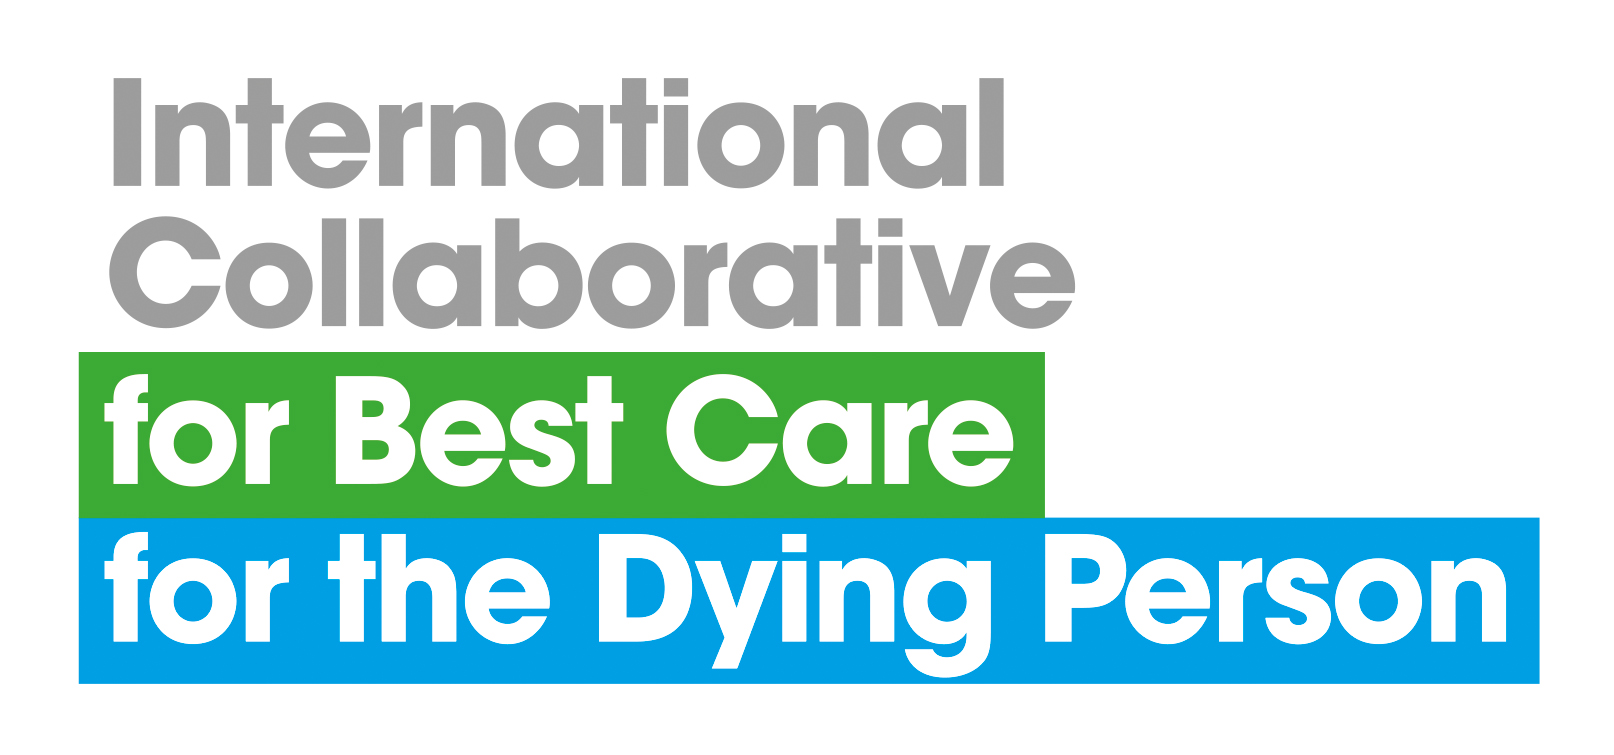 Annual Membership:  International Collaborative for Best Care for the Dying Person